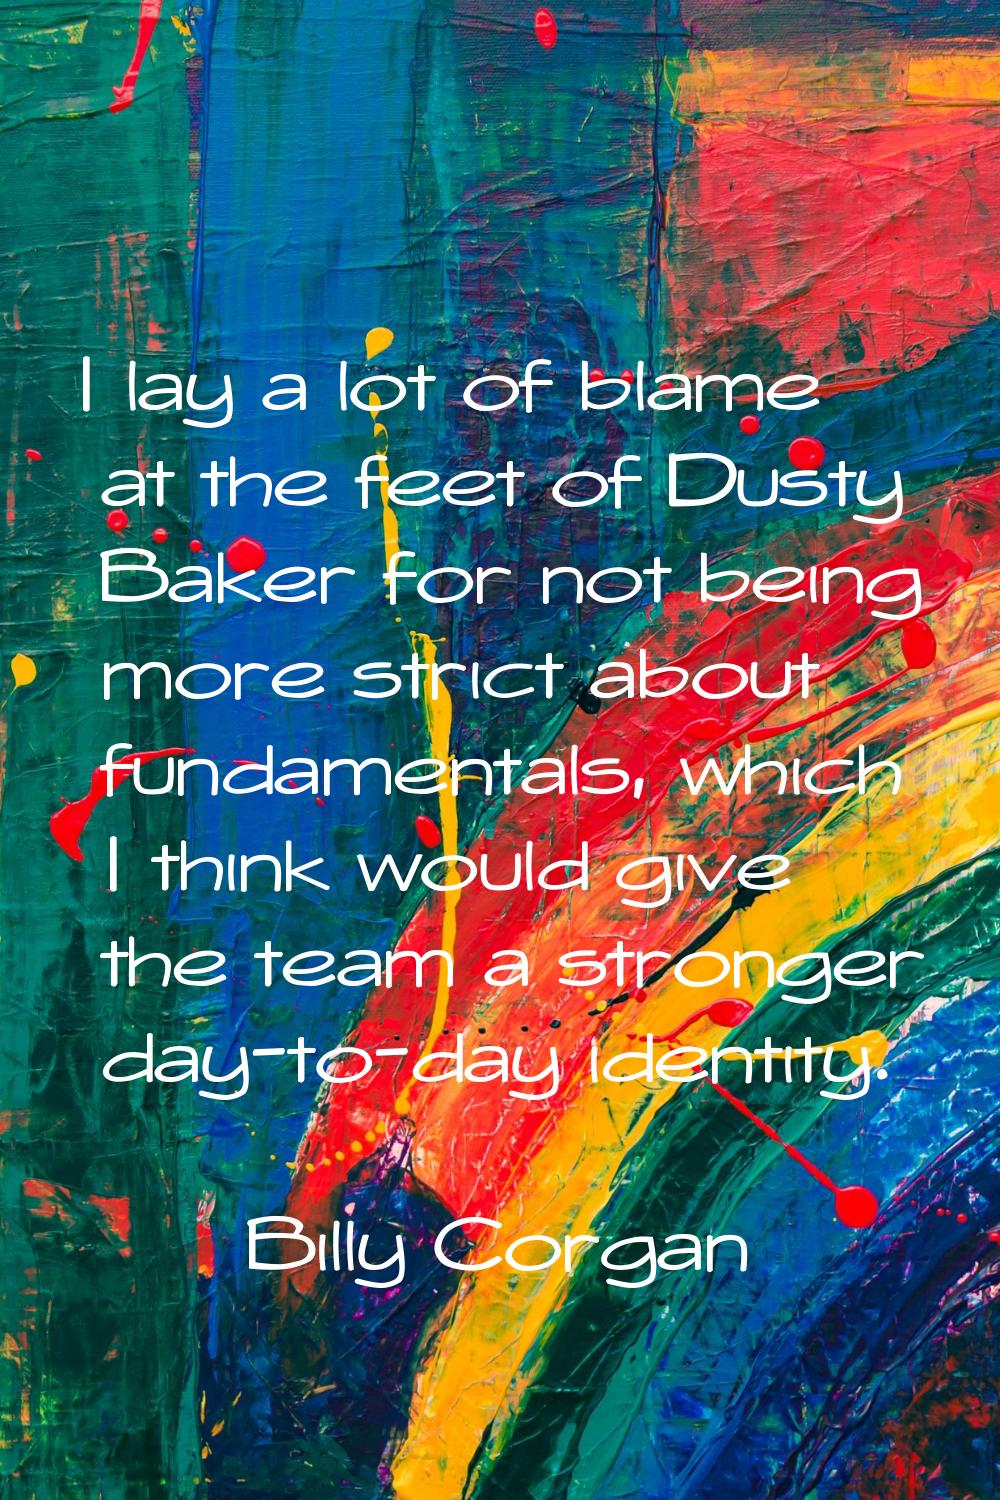 I lay a lot of blame at the feet of Dusty Baker for not being more strict about fundamentals, which